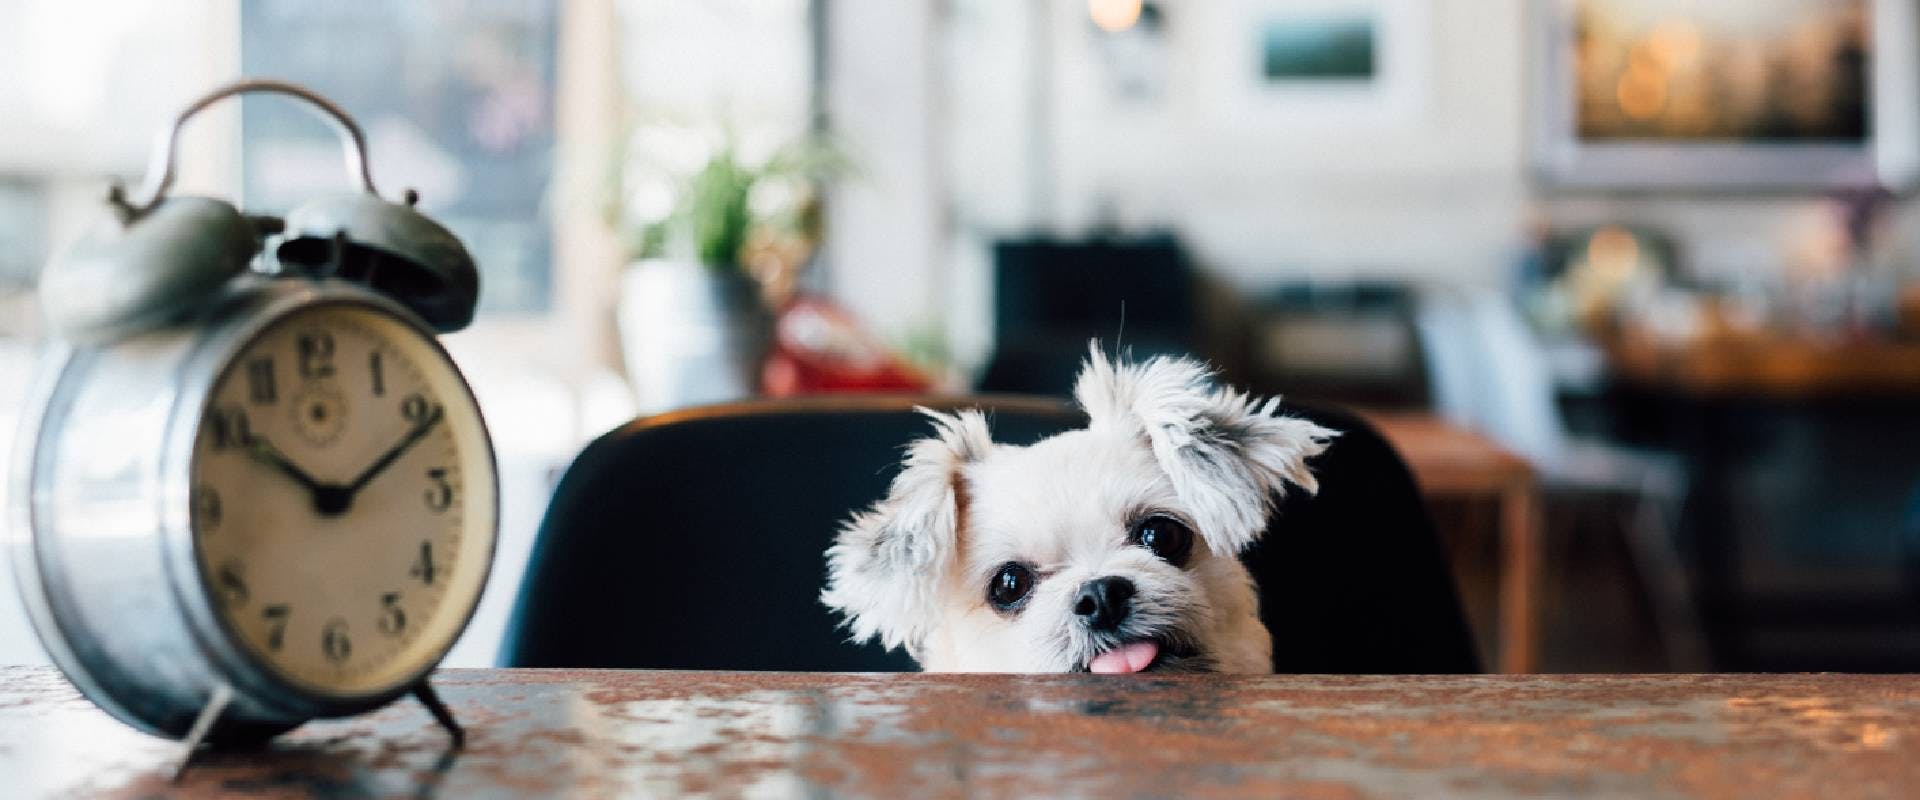 Small white dog sitting at a table in a coffee shop